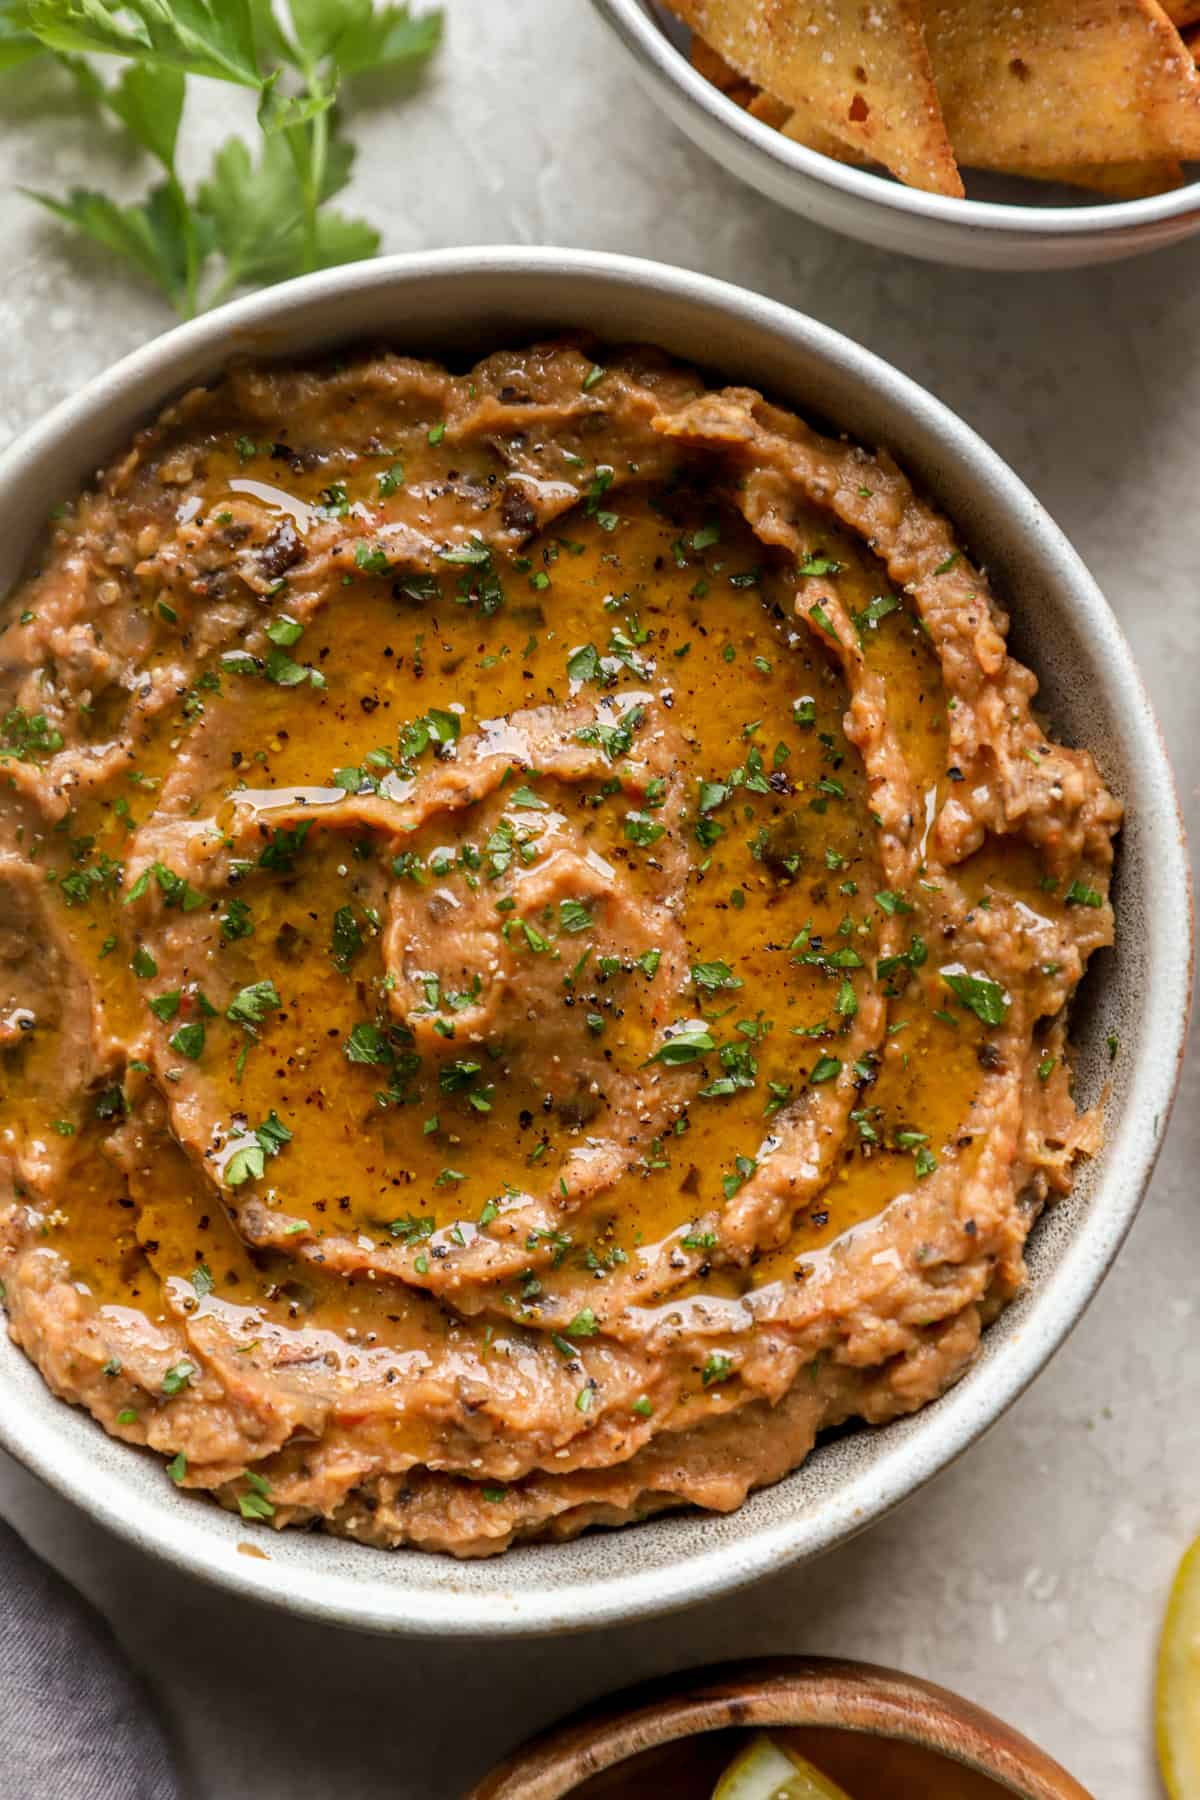 Grilled eggplant dips into bowl from above.